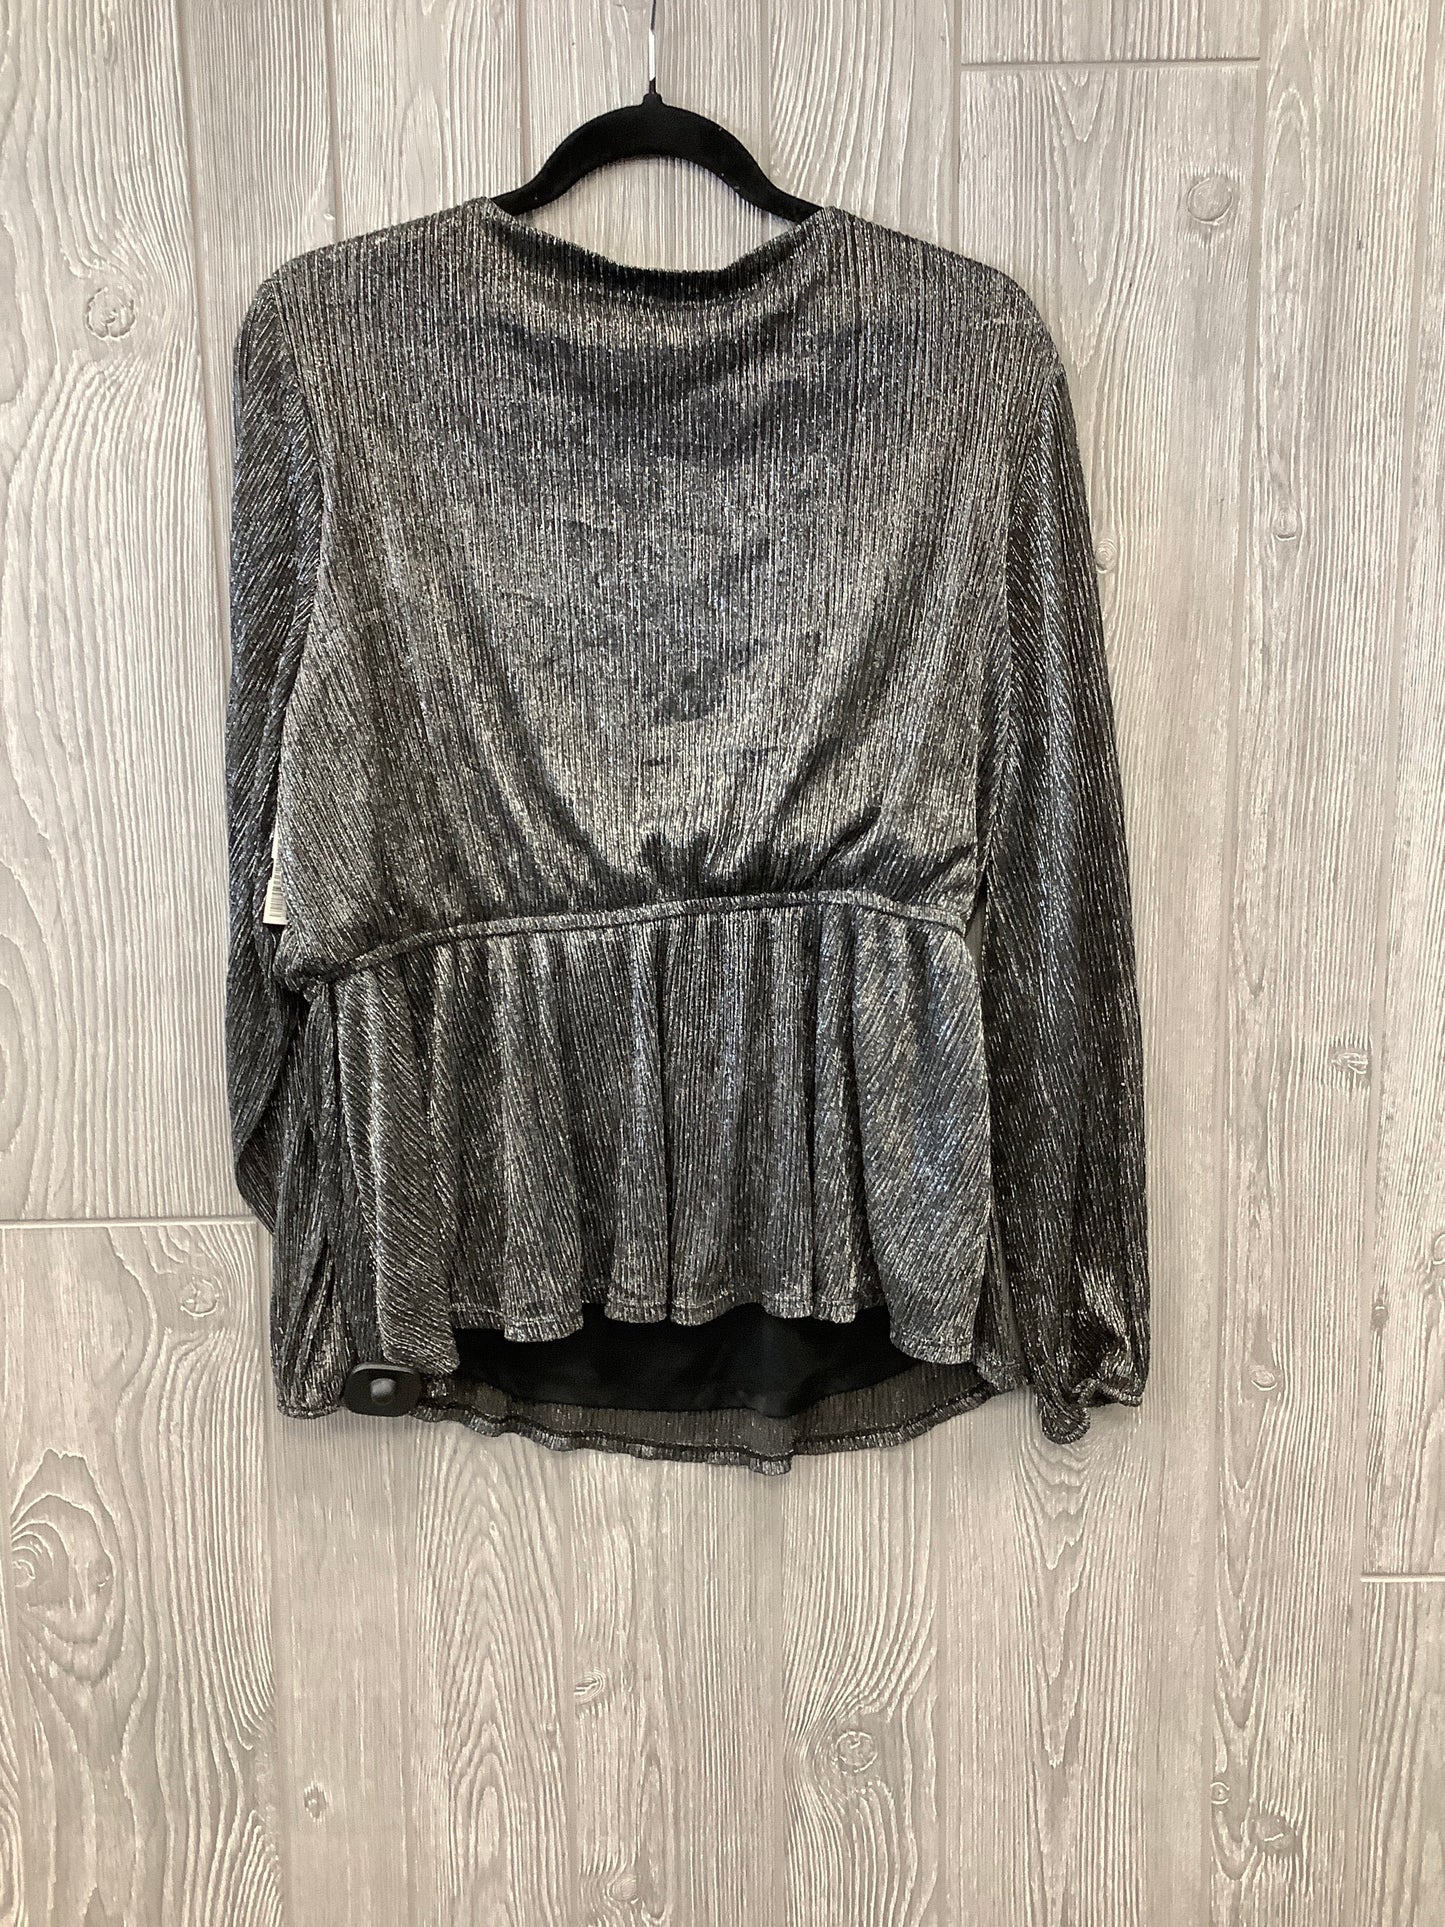 Silver Blouse Long Sleeve Maurices, Size 1x